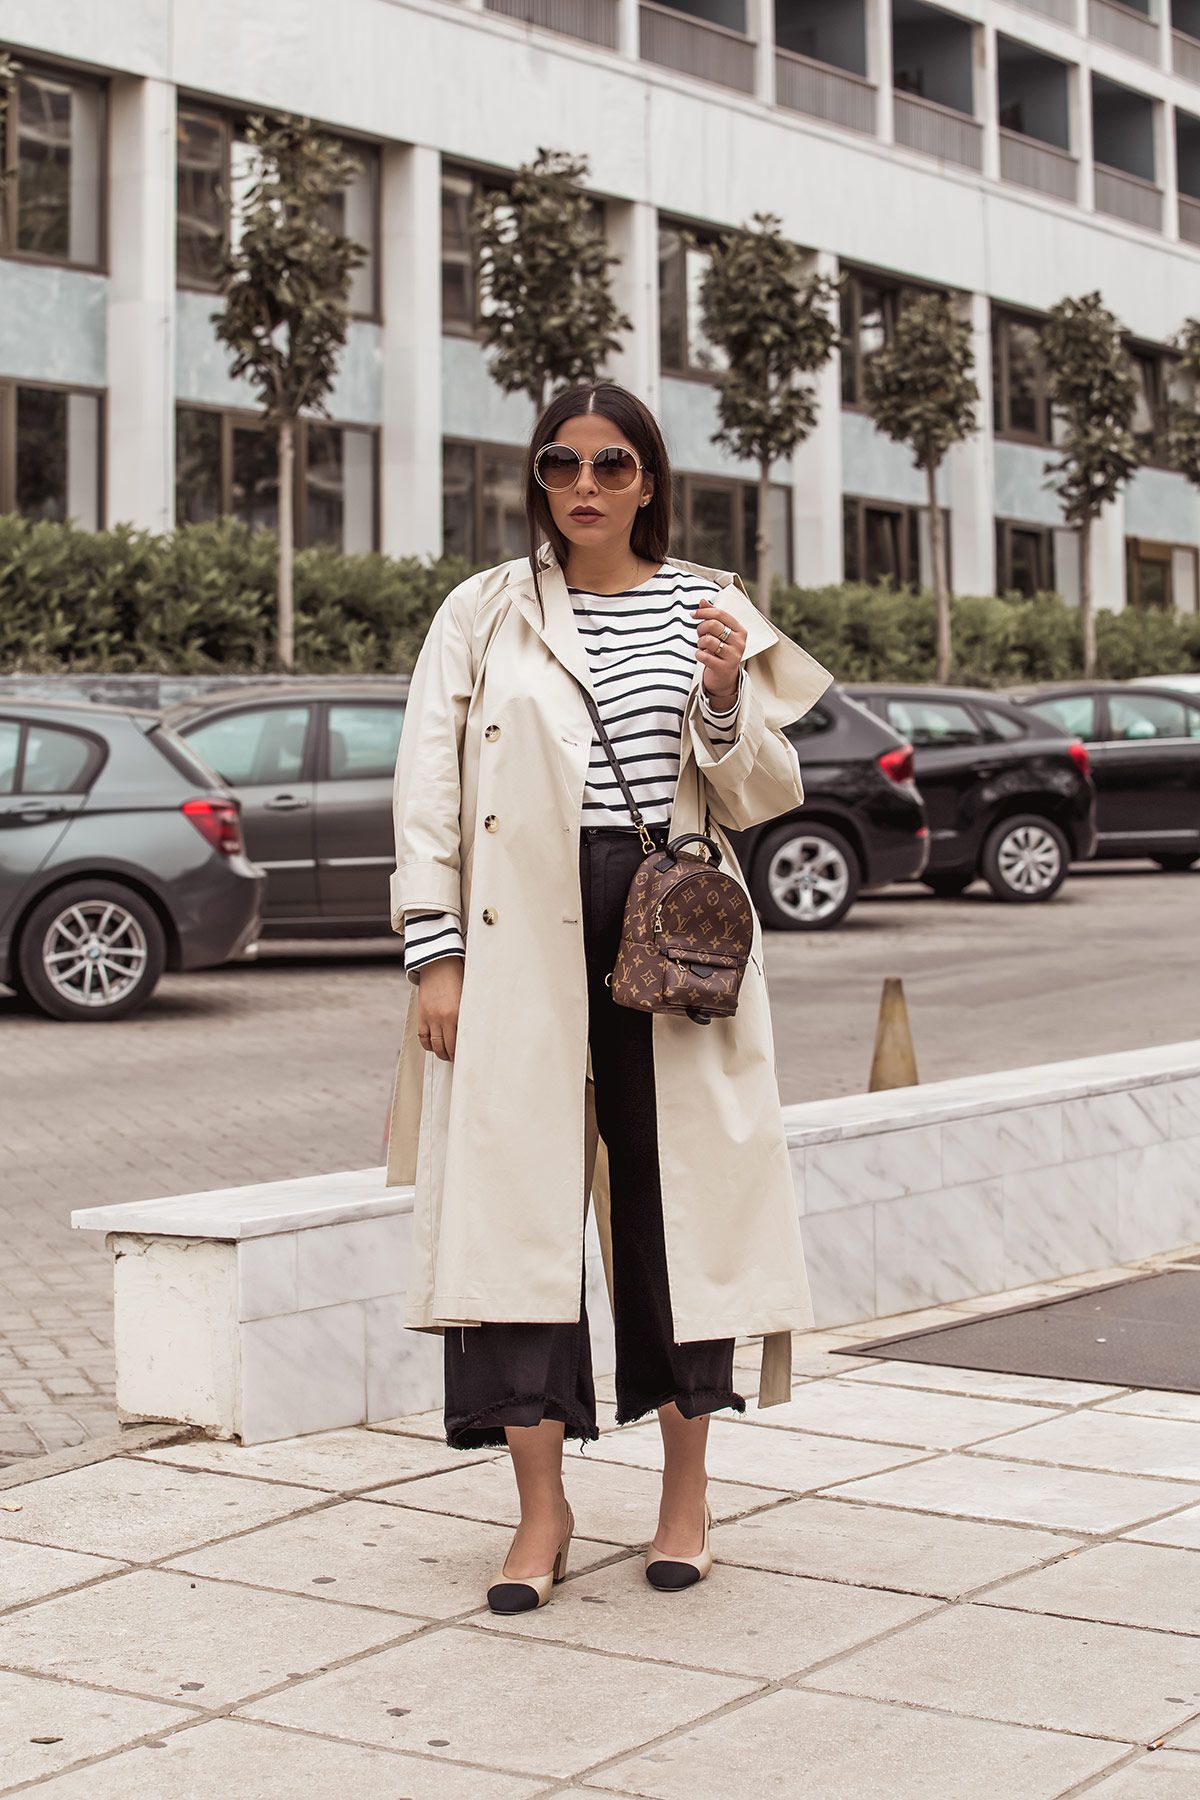 Stella Asteria wearing classic look with beige trench coat, breton top, Louis Vuitton Palm Springs backpack as a cross body, black denim culottes, Chanel slingbacks and Chloe Carlina sunglasses